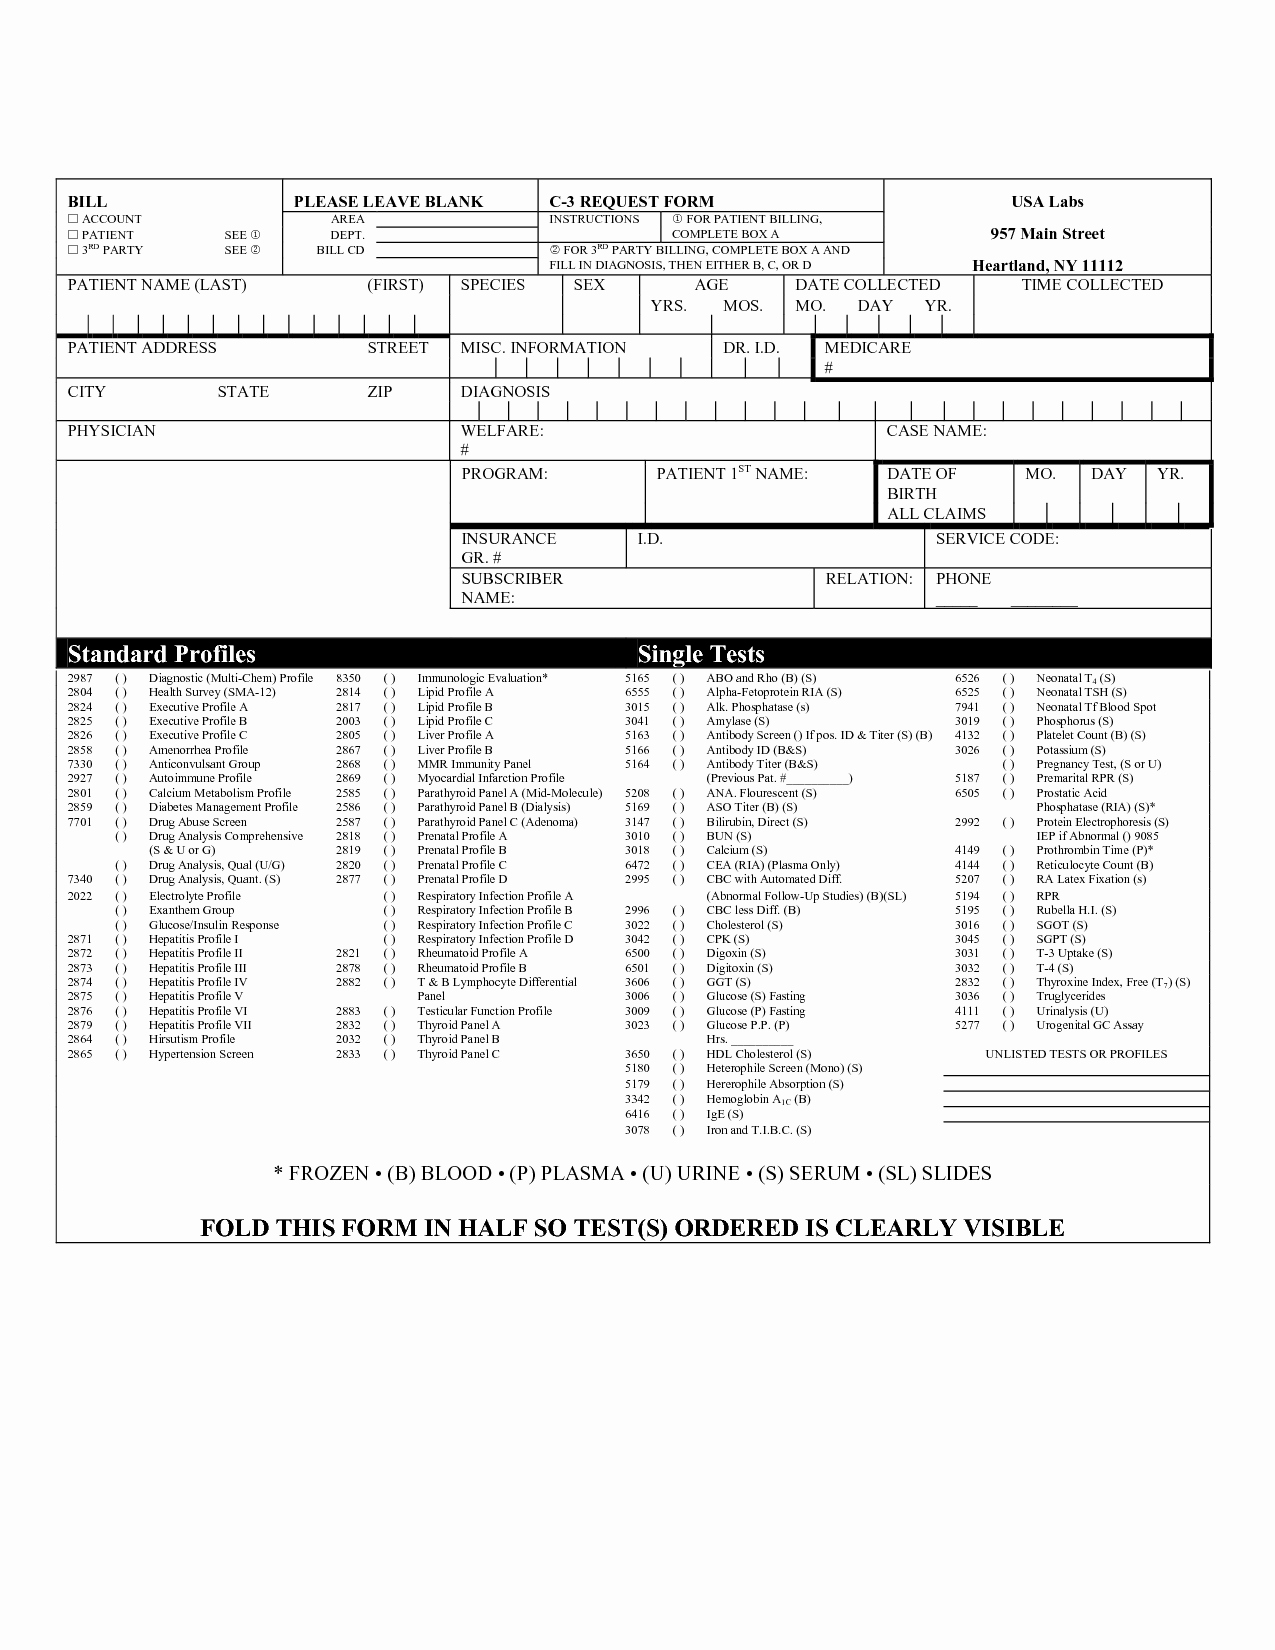 Lab Requisition form Template Fresh Lab Requisition form Template Image Collections